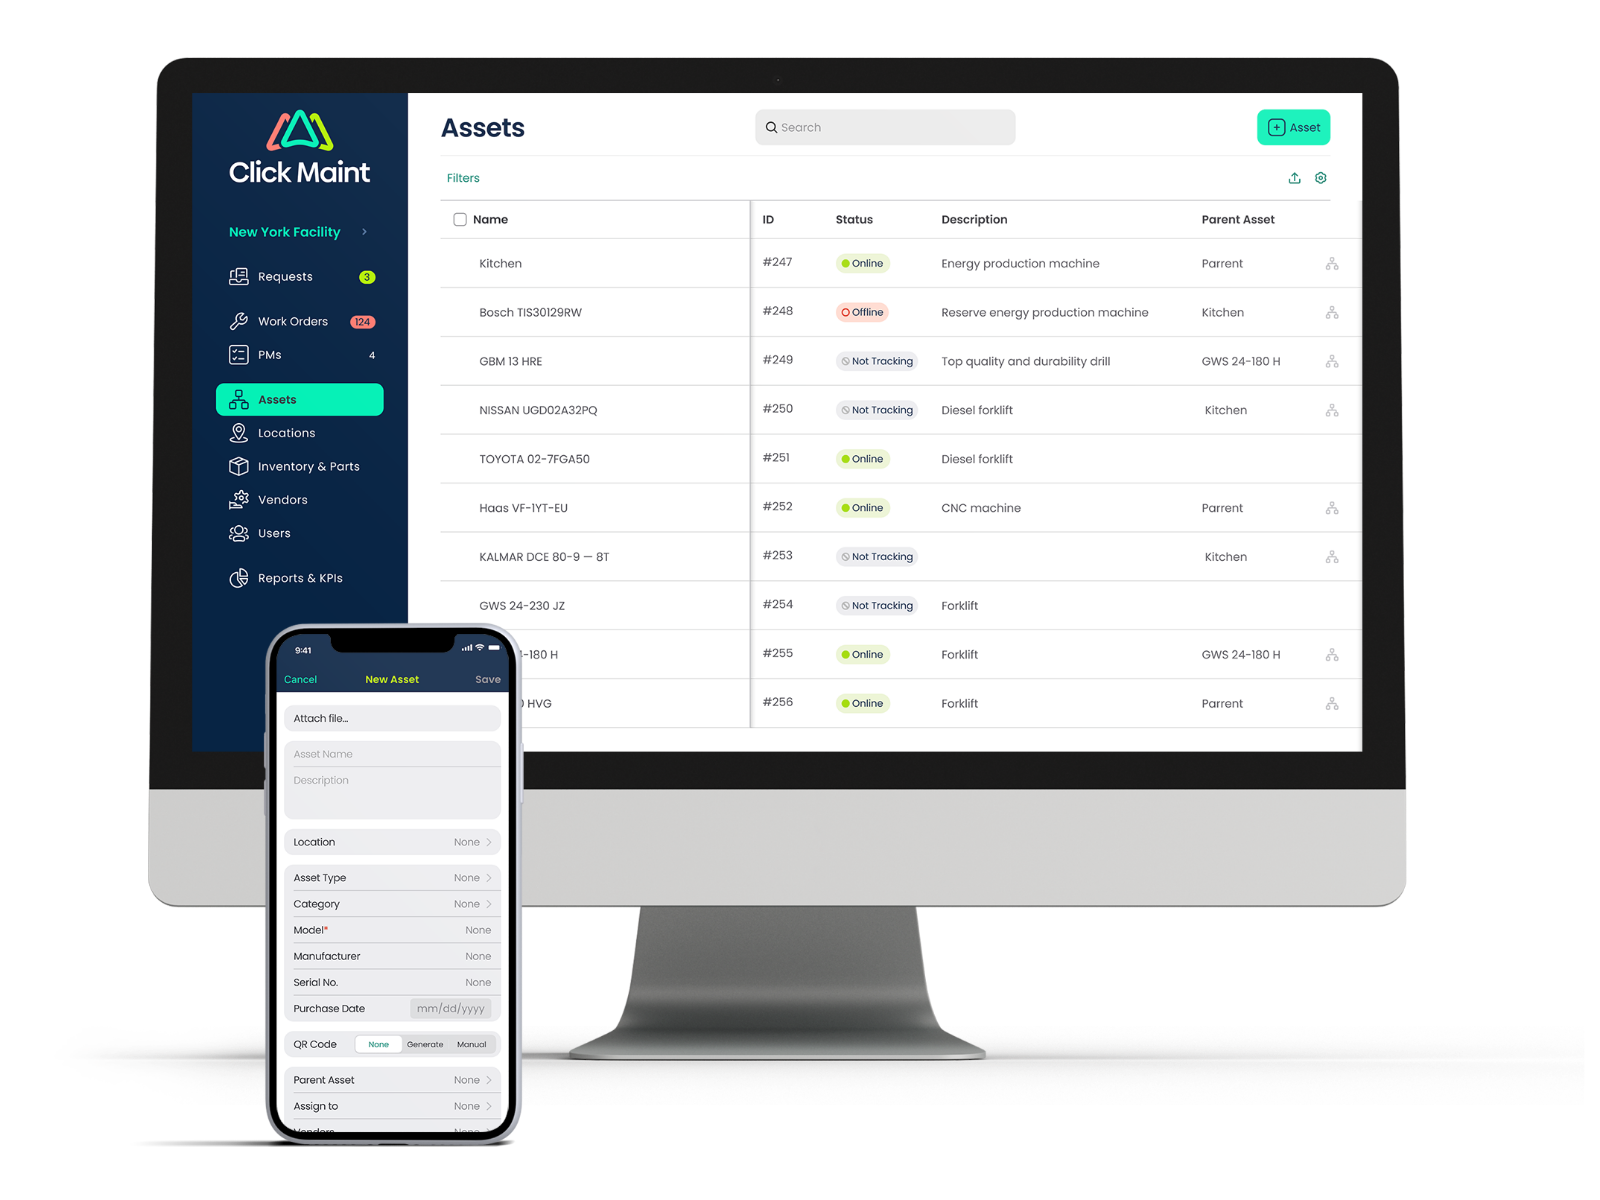 Asset List View - View and manage critical assets and equipment from an easy to use interface. Users can add new assets, updates assets and manage work orders from the Asset List view.